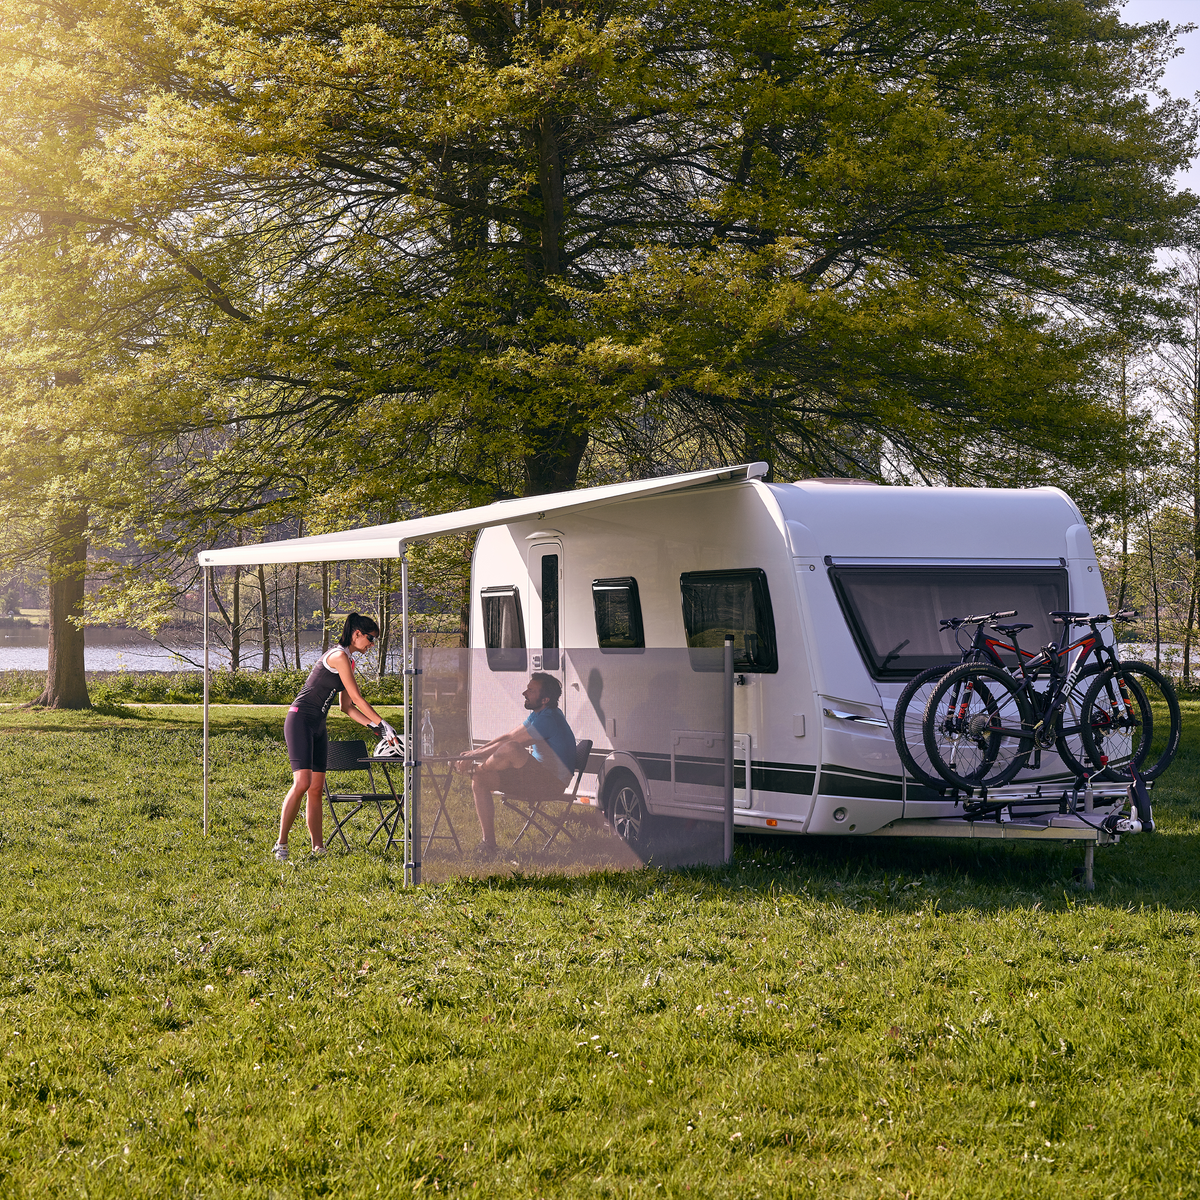 An rv is parked in the grass and a person walks towards the Thule View Blocker Side awning side wall.